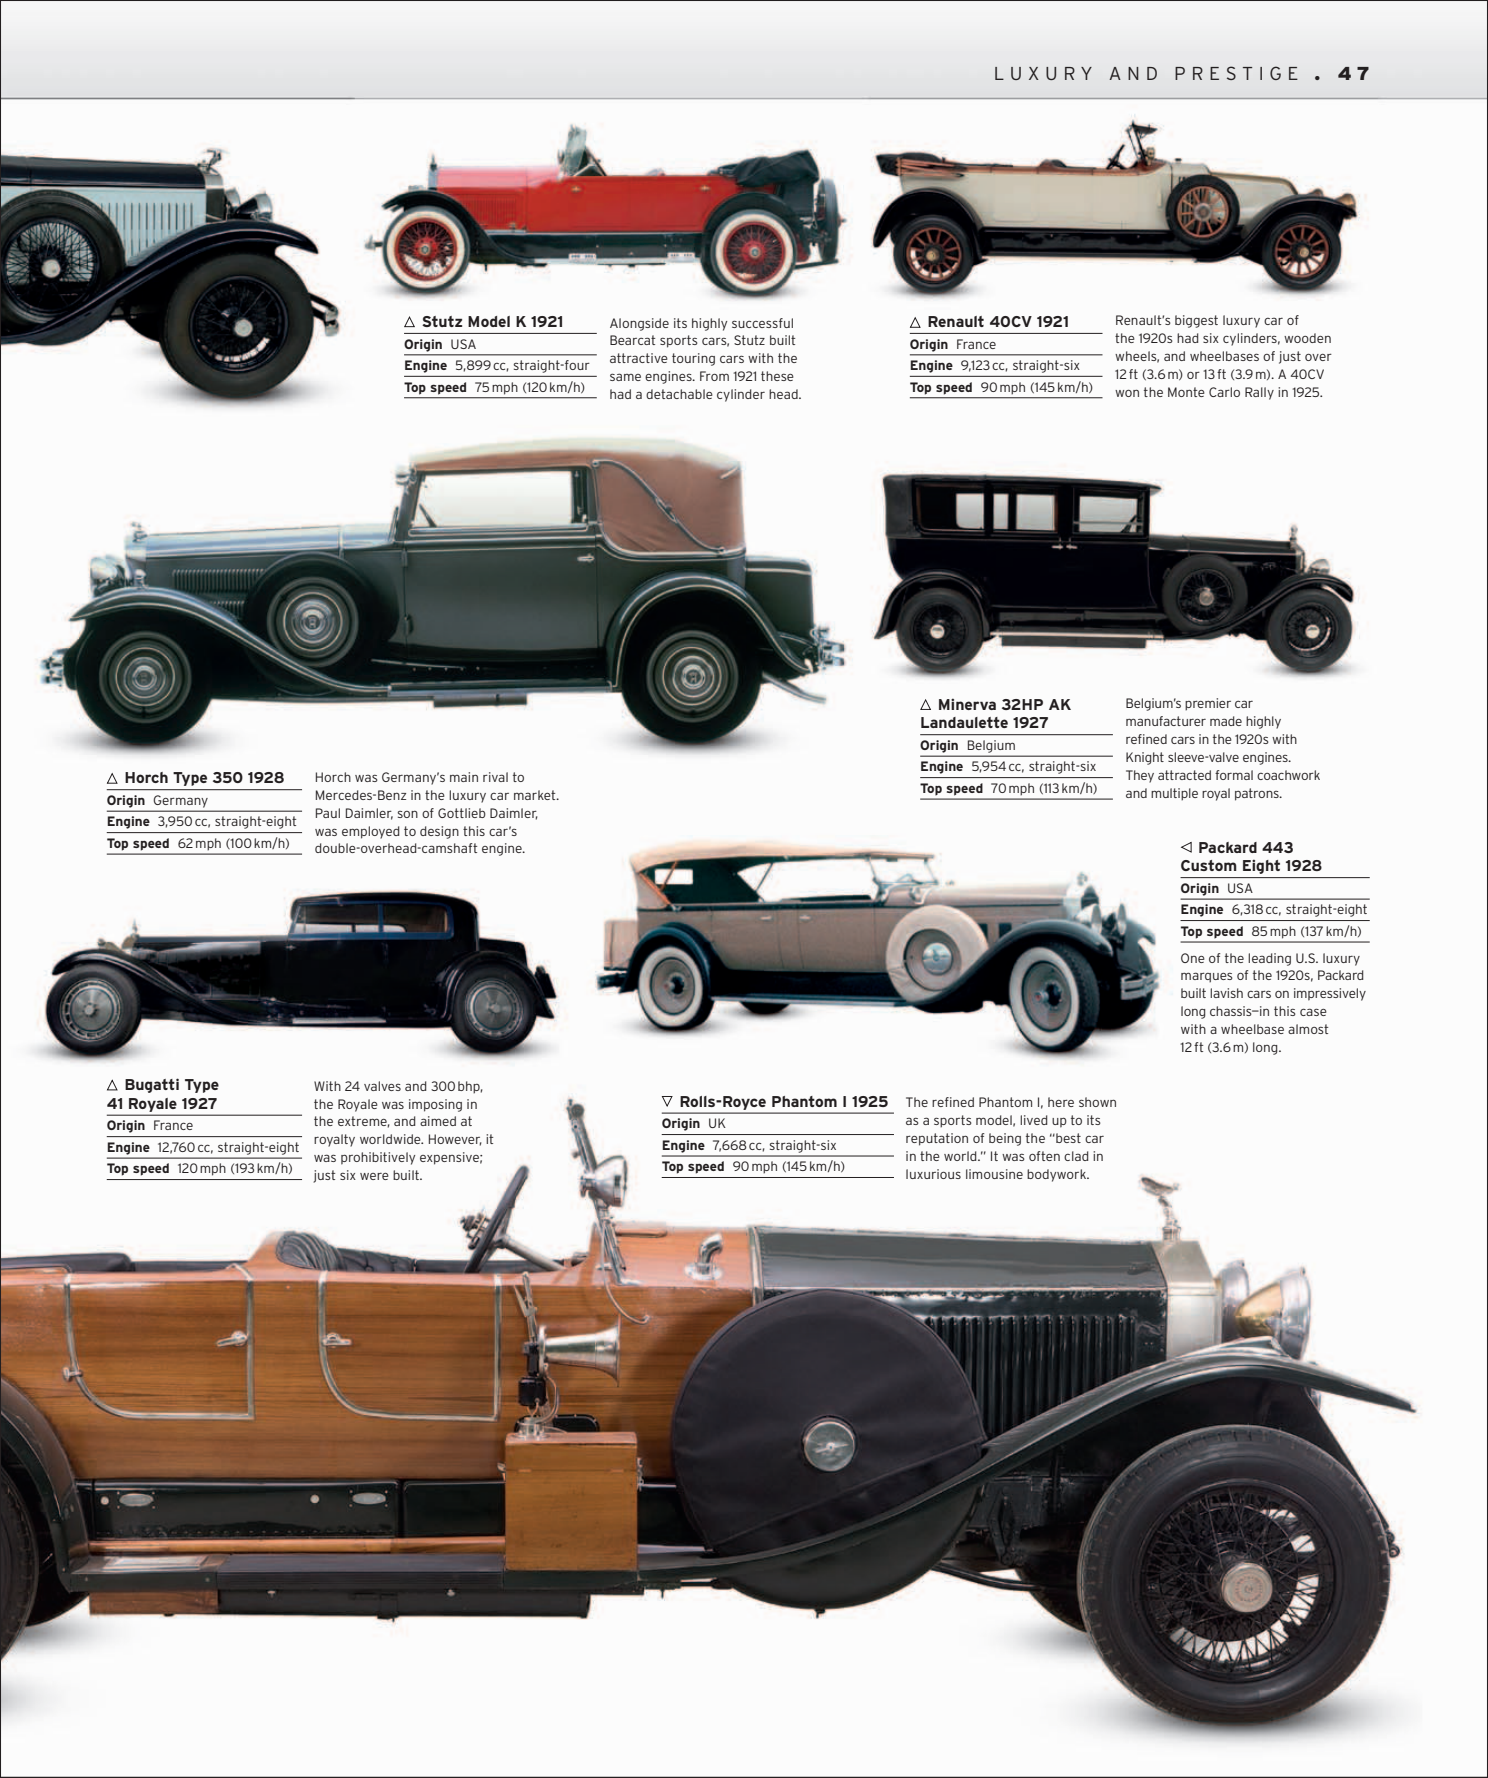 Car%20-%20The%20Definitive%20Visual%20History%20of%20the%20Automobile_049.png